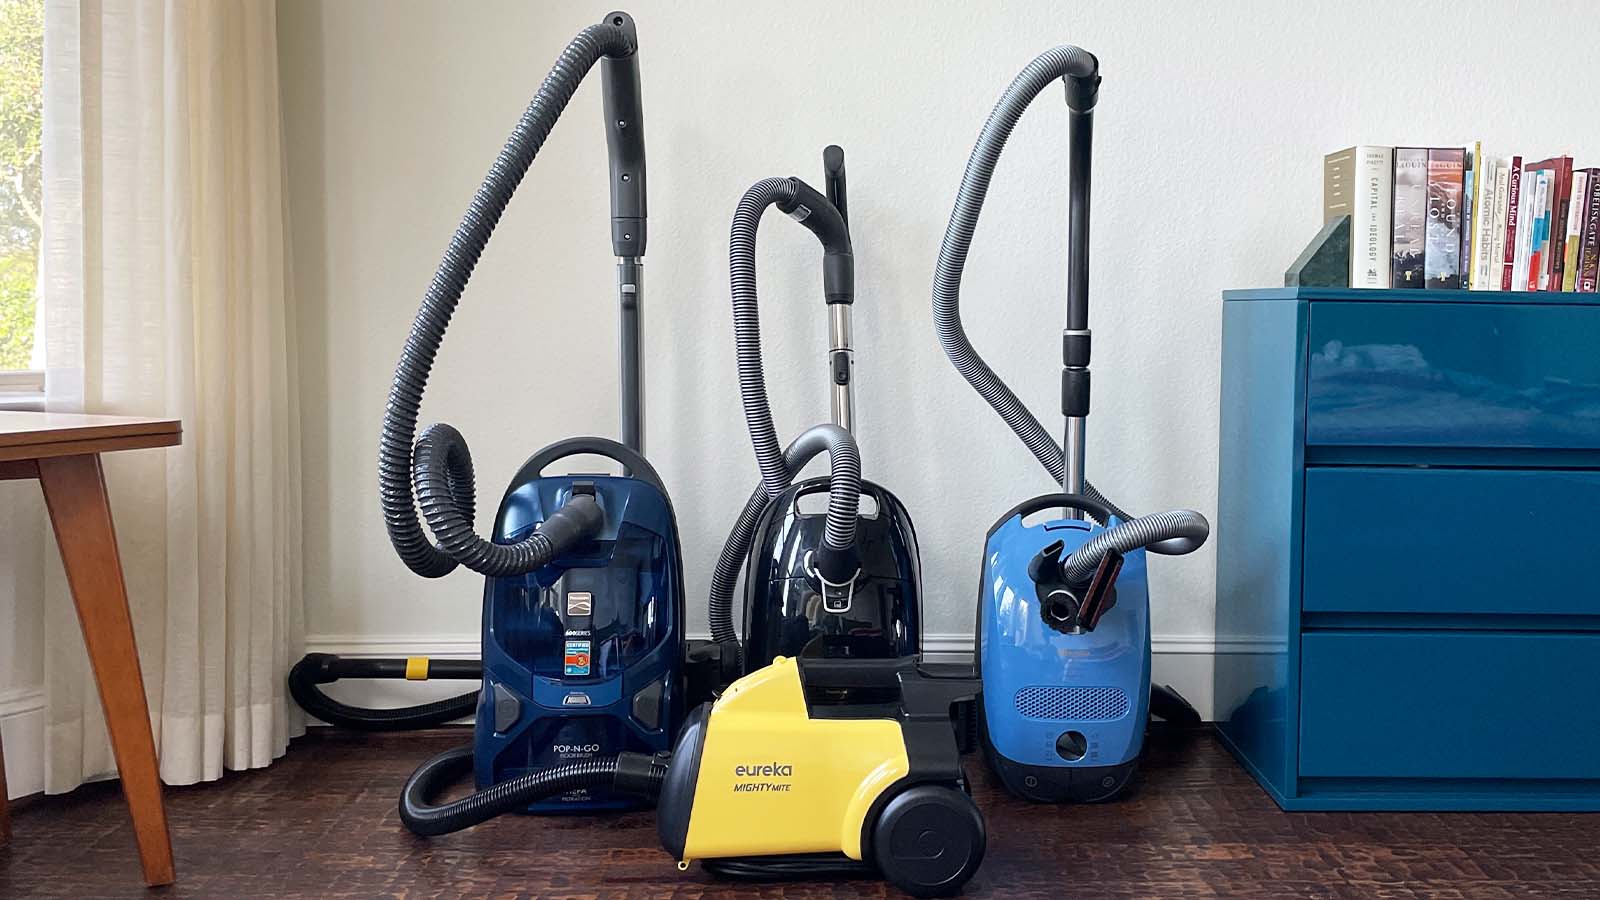 The Best Canister Vacuums In 2021 Cnn, Best Canister Vacuum For Pet Hair And Hardwood Floors Carpet